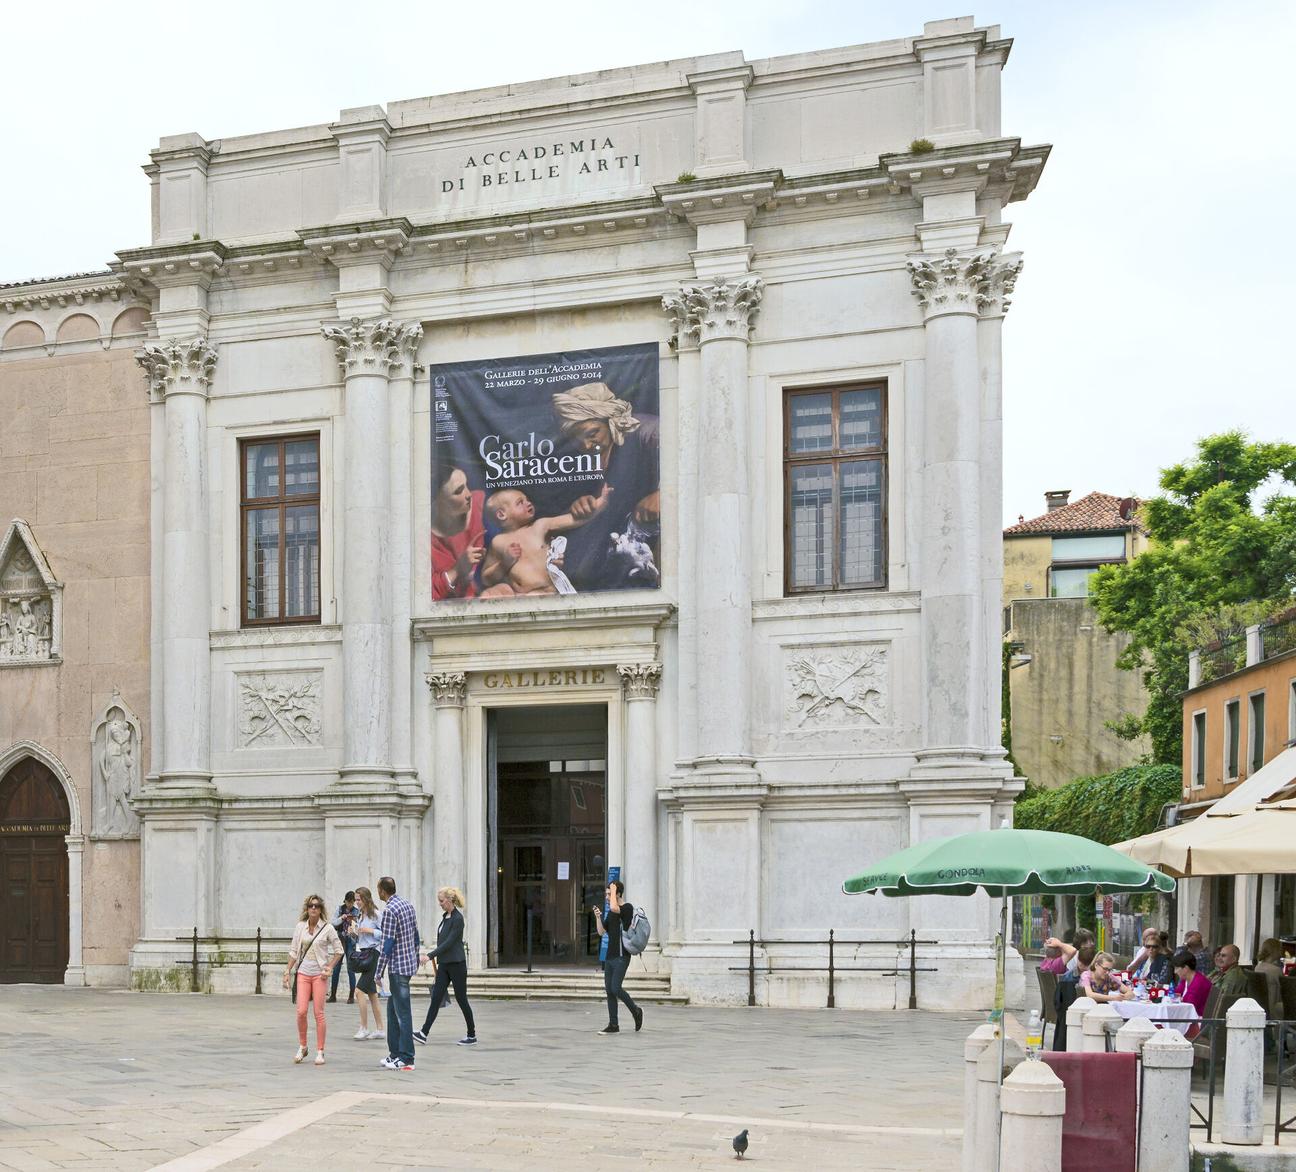 A photo of Accademia Gallery of Venice